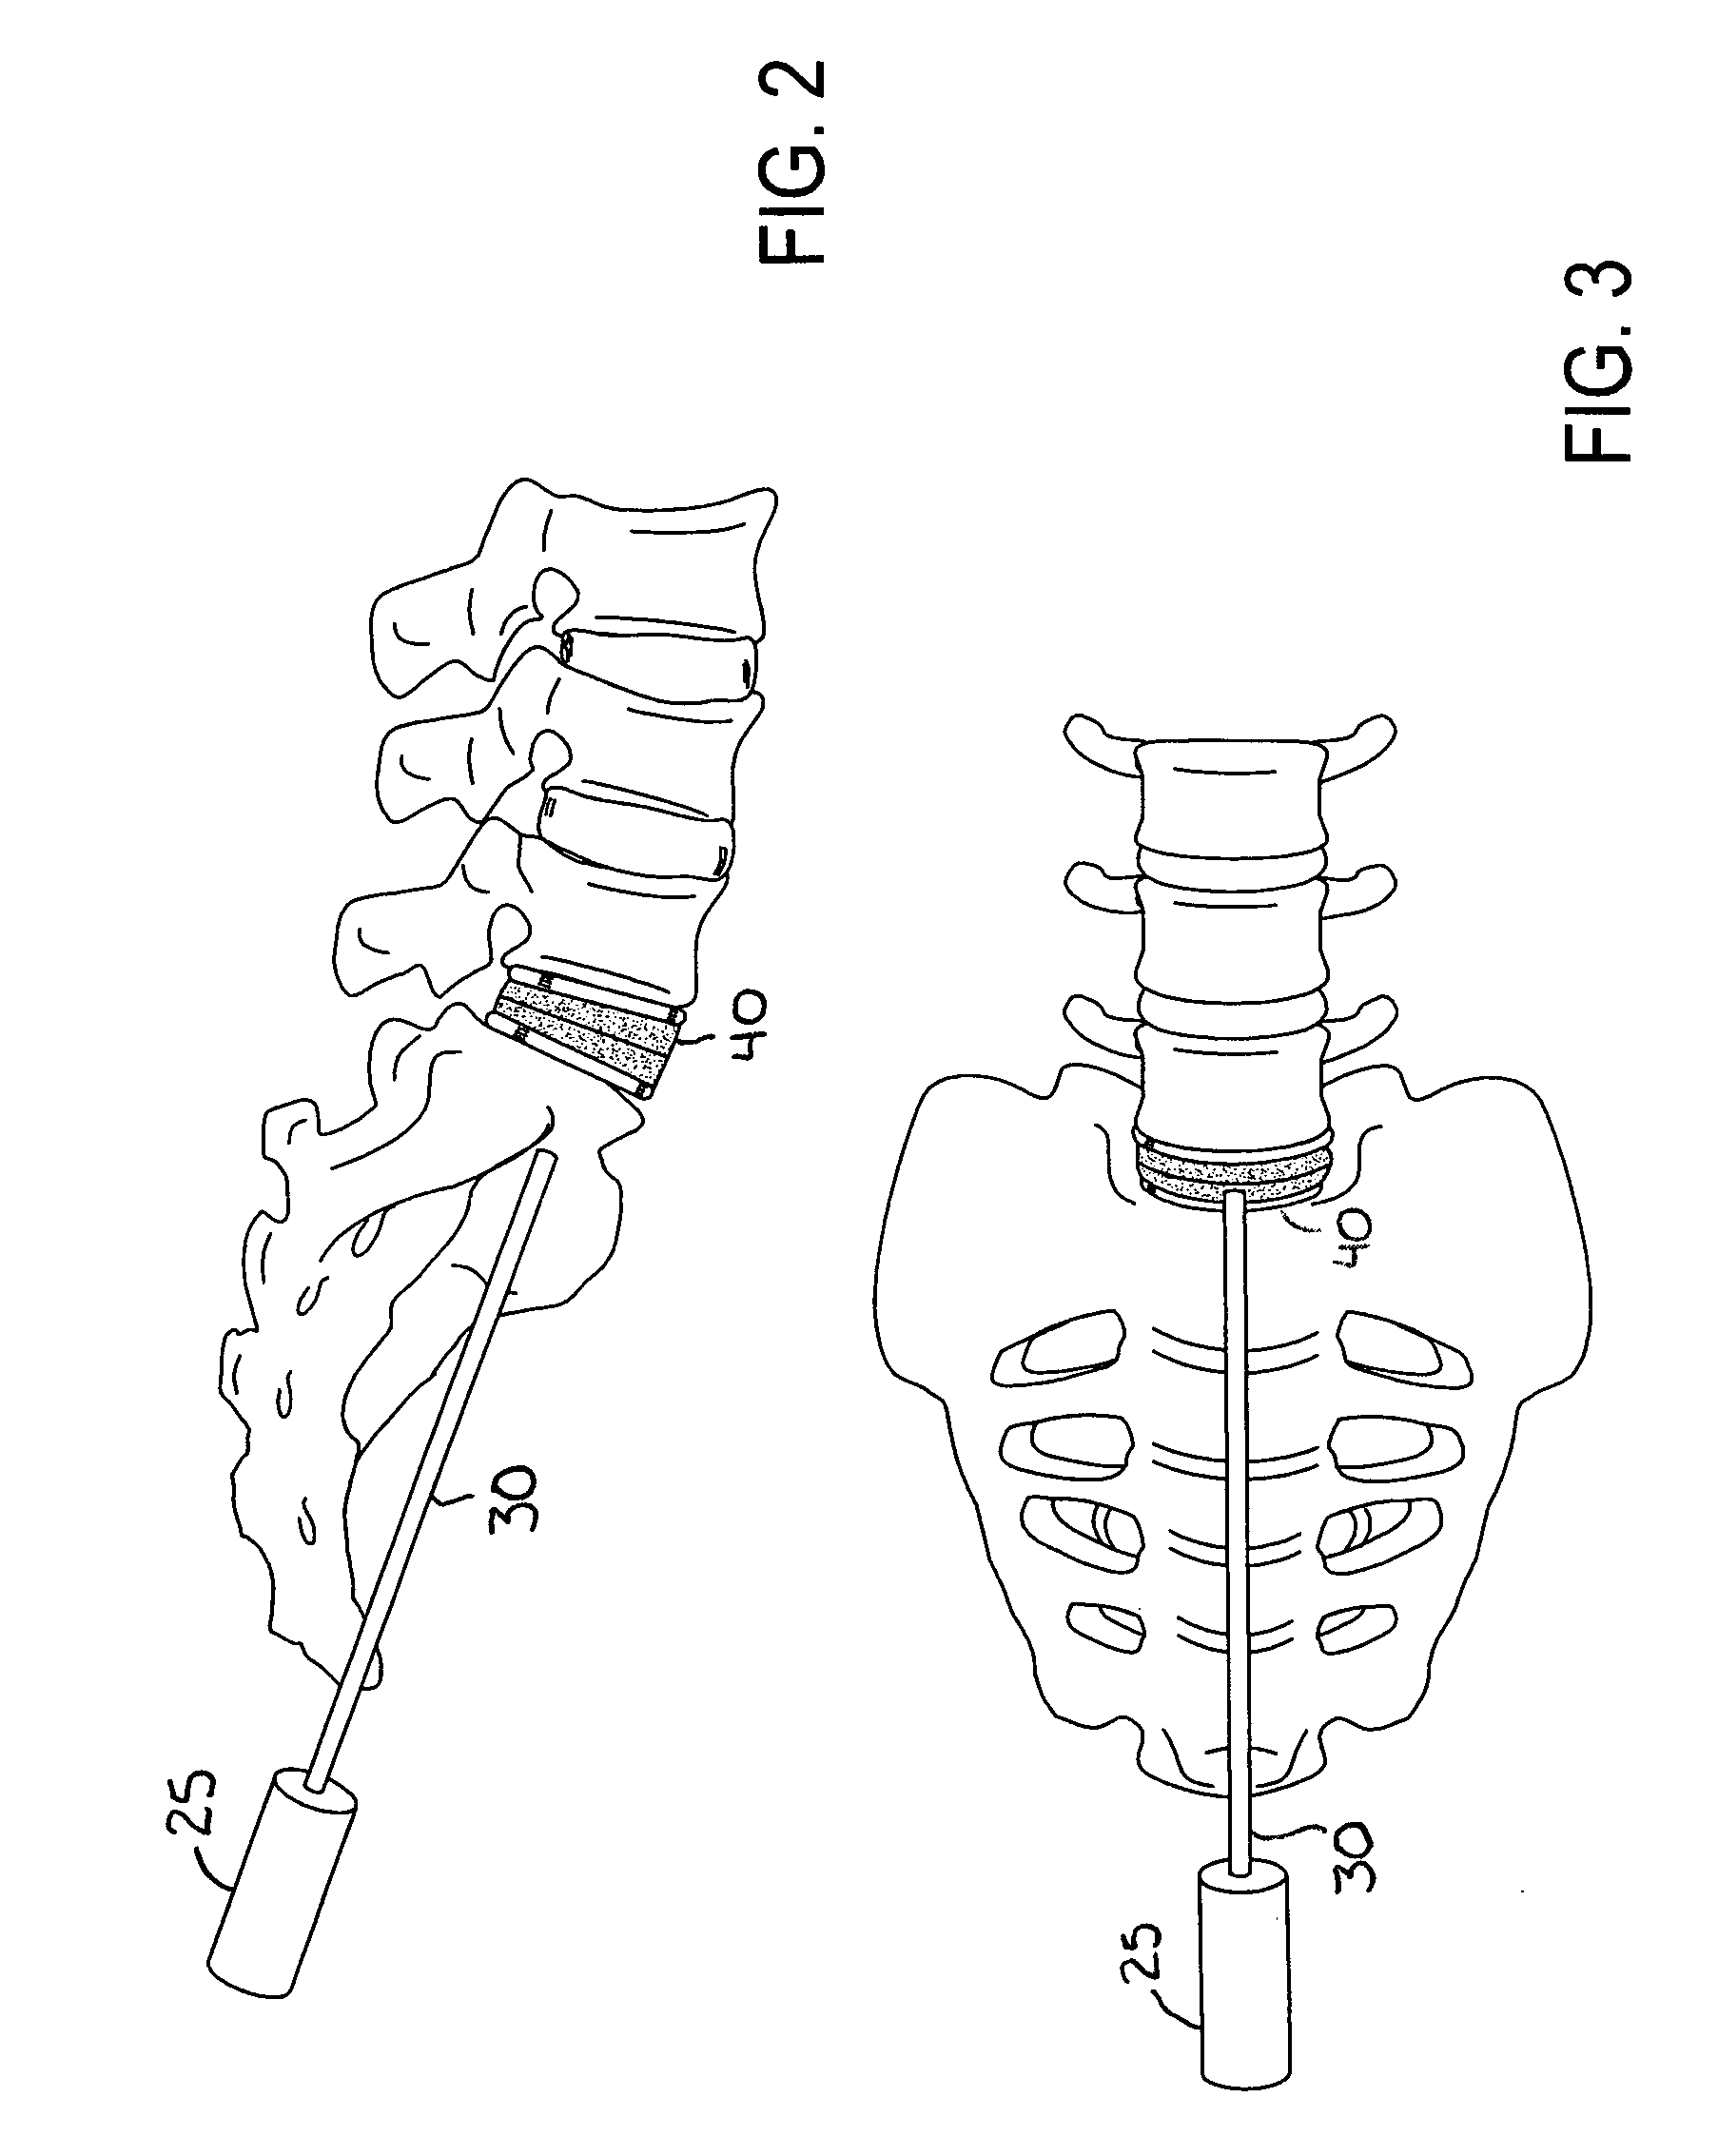 Method of percutaneous paracoccygeal pre-sacral stabilization of a failed artificial disc replacement